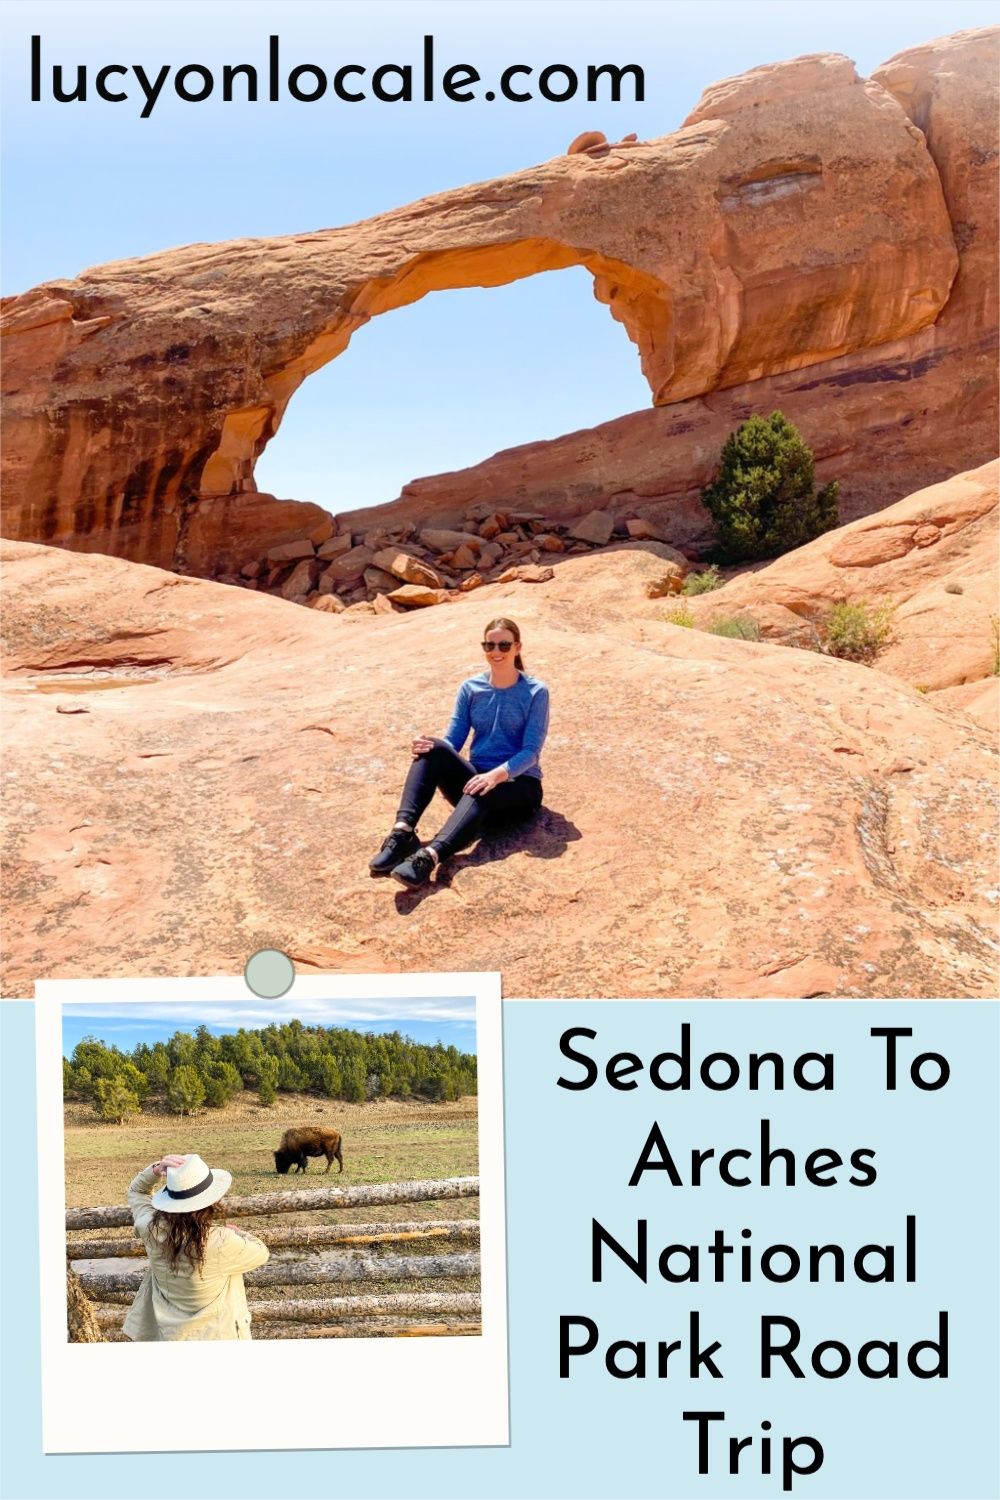 Sedona to Arches National Park road trip